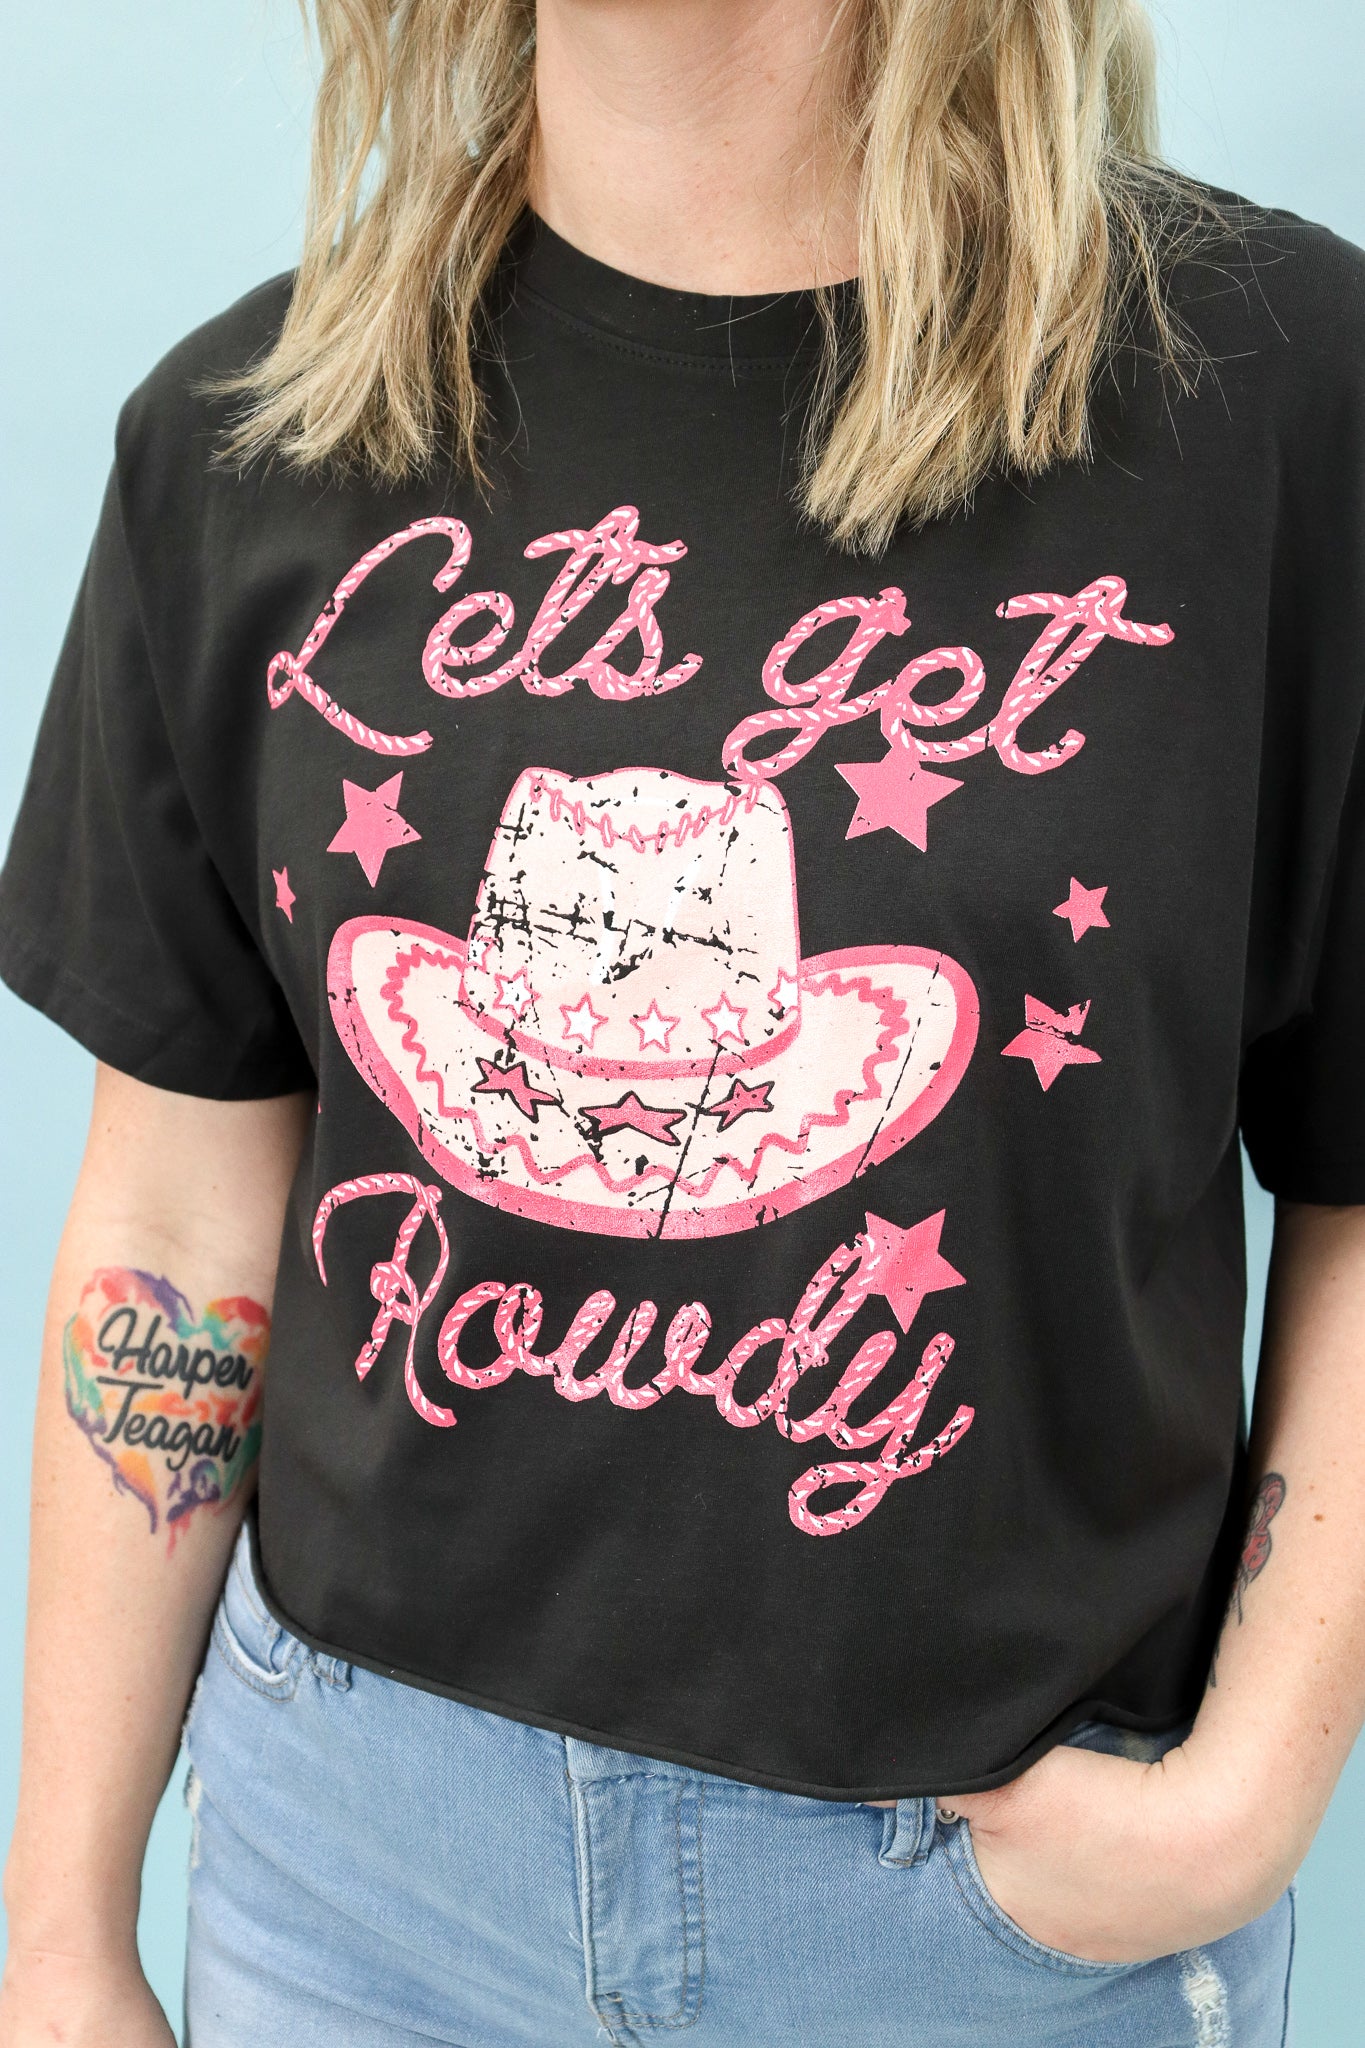 Let's Get Rowdy Cropped Graphic Tee